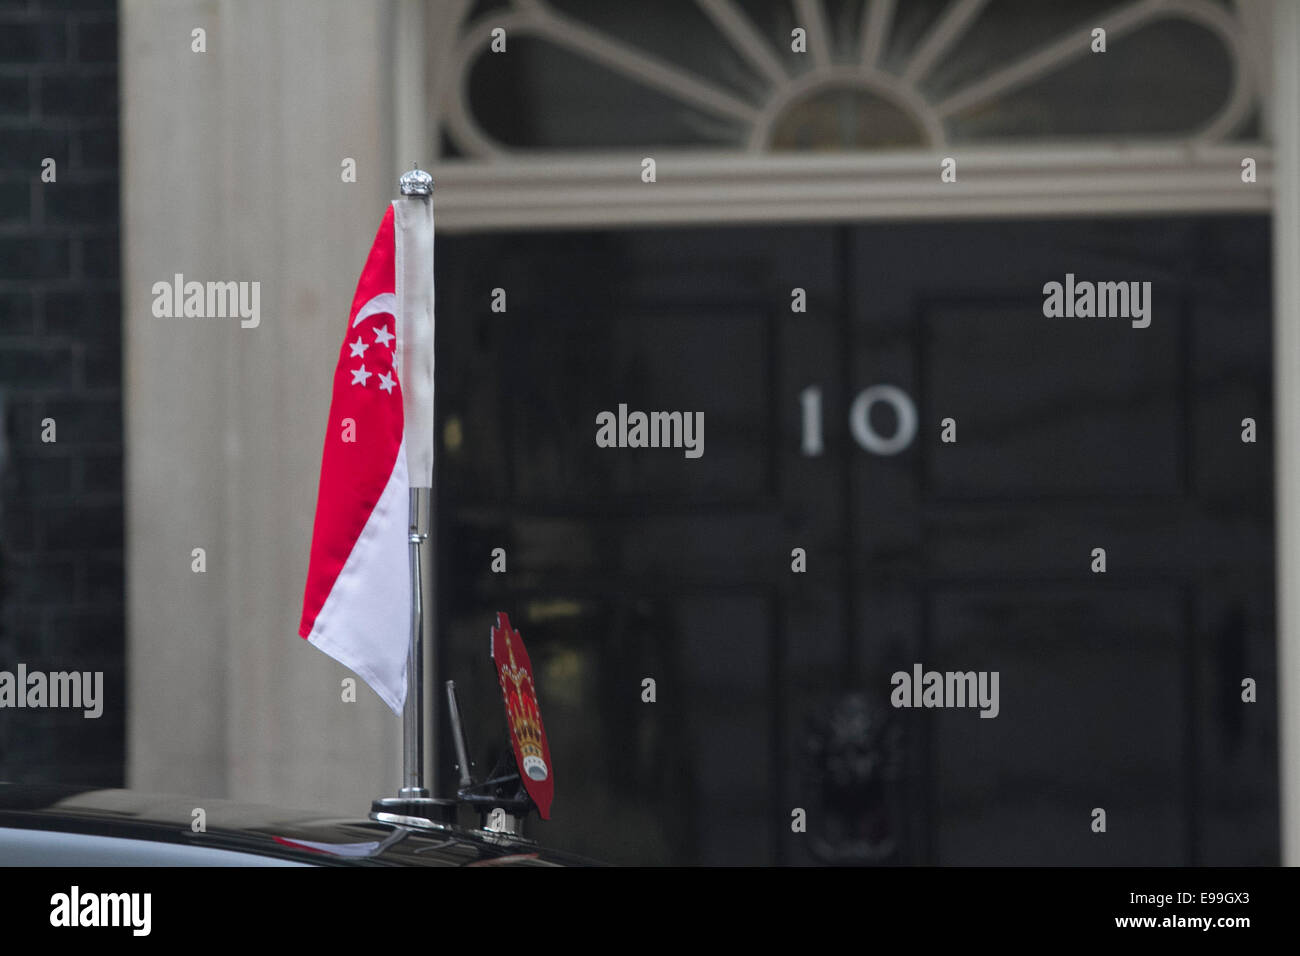 London, UK. 22nd Oct, 2014. Westminster 22nd October 2014. The flag of the Republic of Singapore on top of the limousine parked outside 10 Downing street. The president of Singapore Tony Tan is welcomed at Downing street by British Prime Minister David Cameron Credit:  amer ghazzal/Alamy Live News Stock Photo